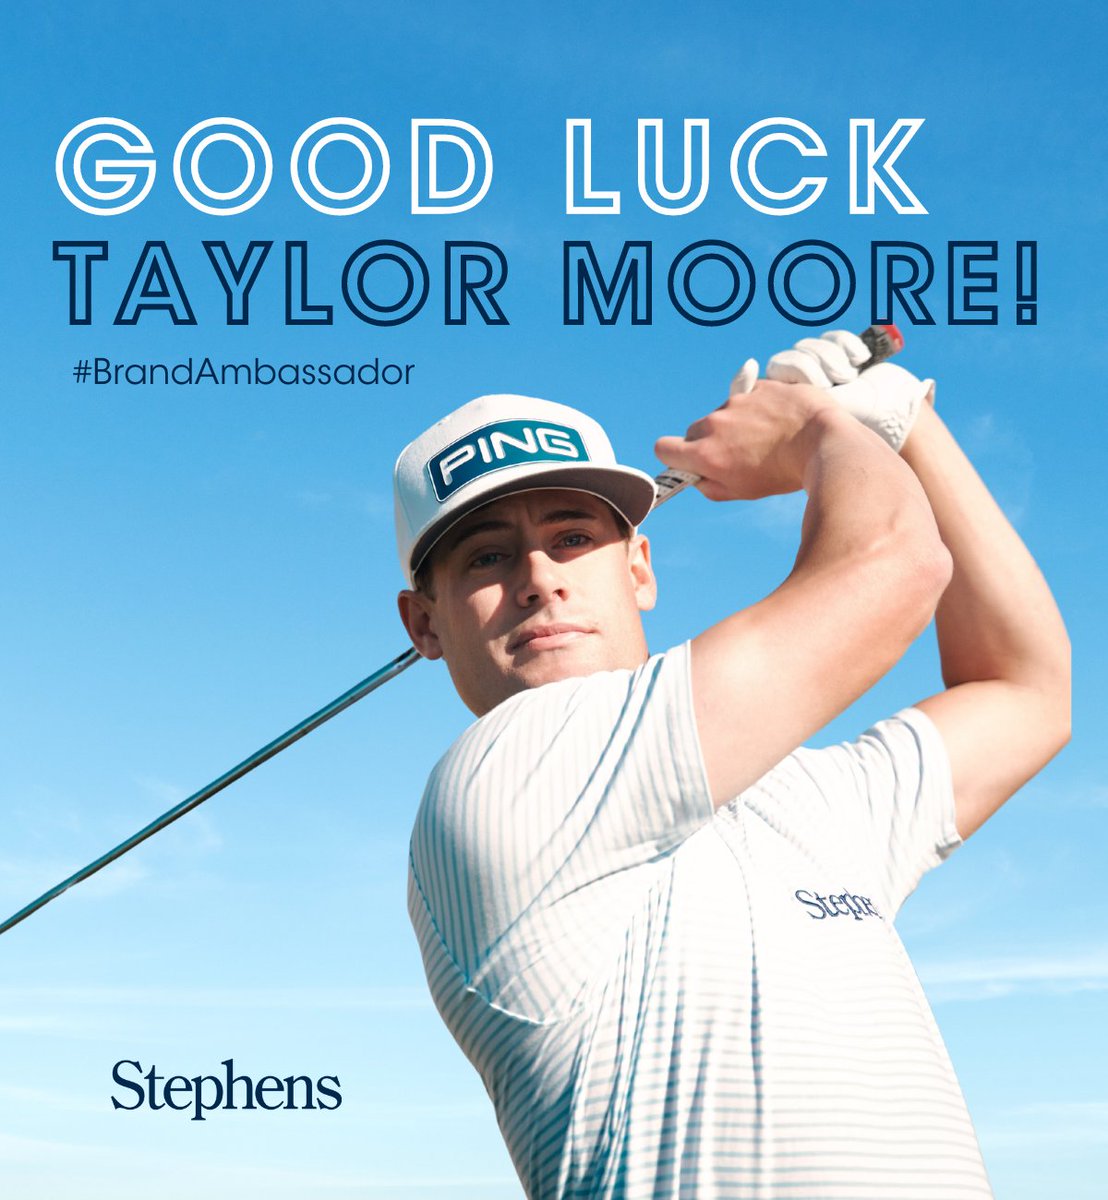 We are honored to have such a talented and dedicated player representing Stephens at #themasters! Wishing you the best of luck, @taylormooregolf!